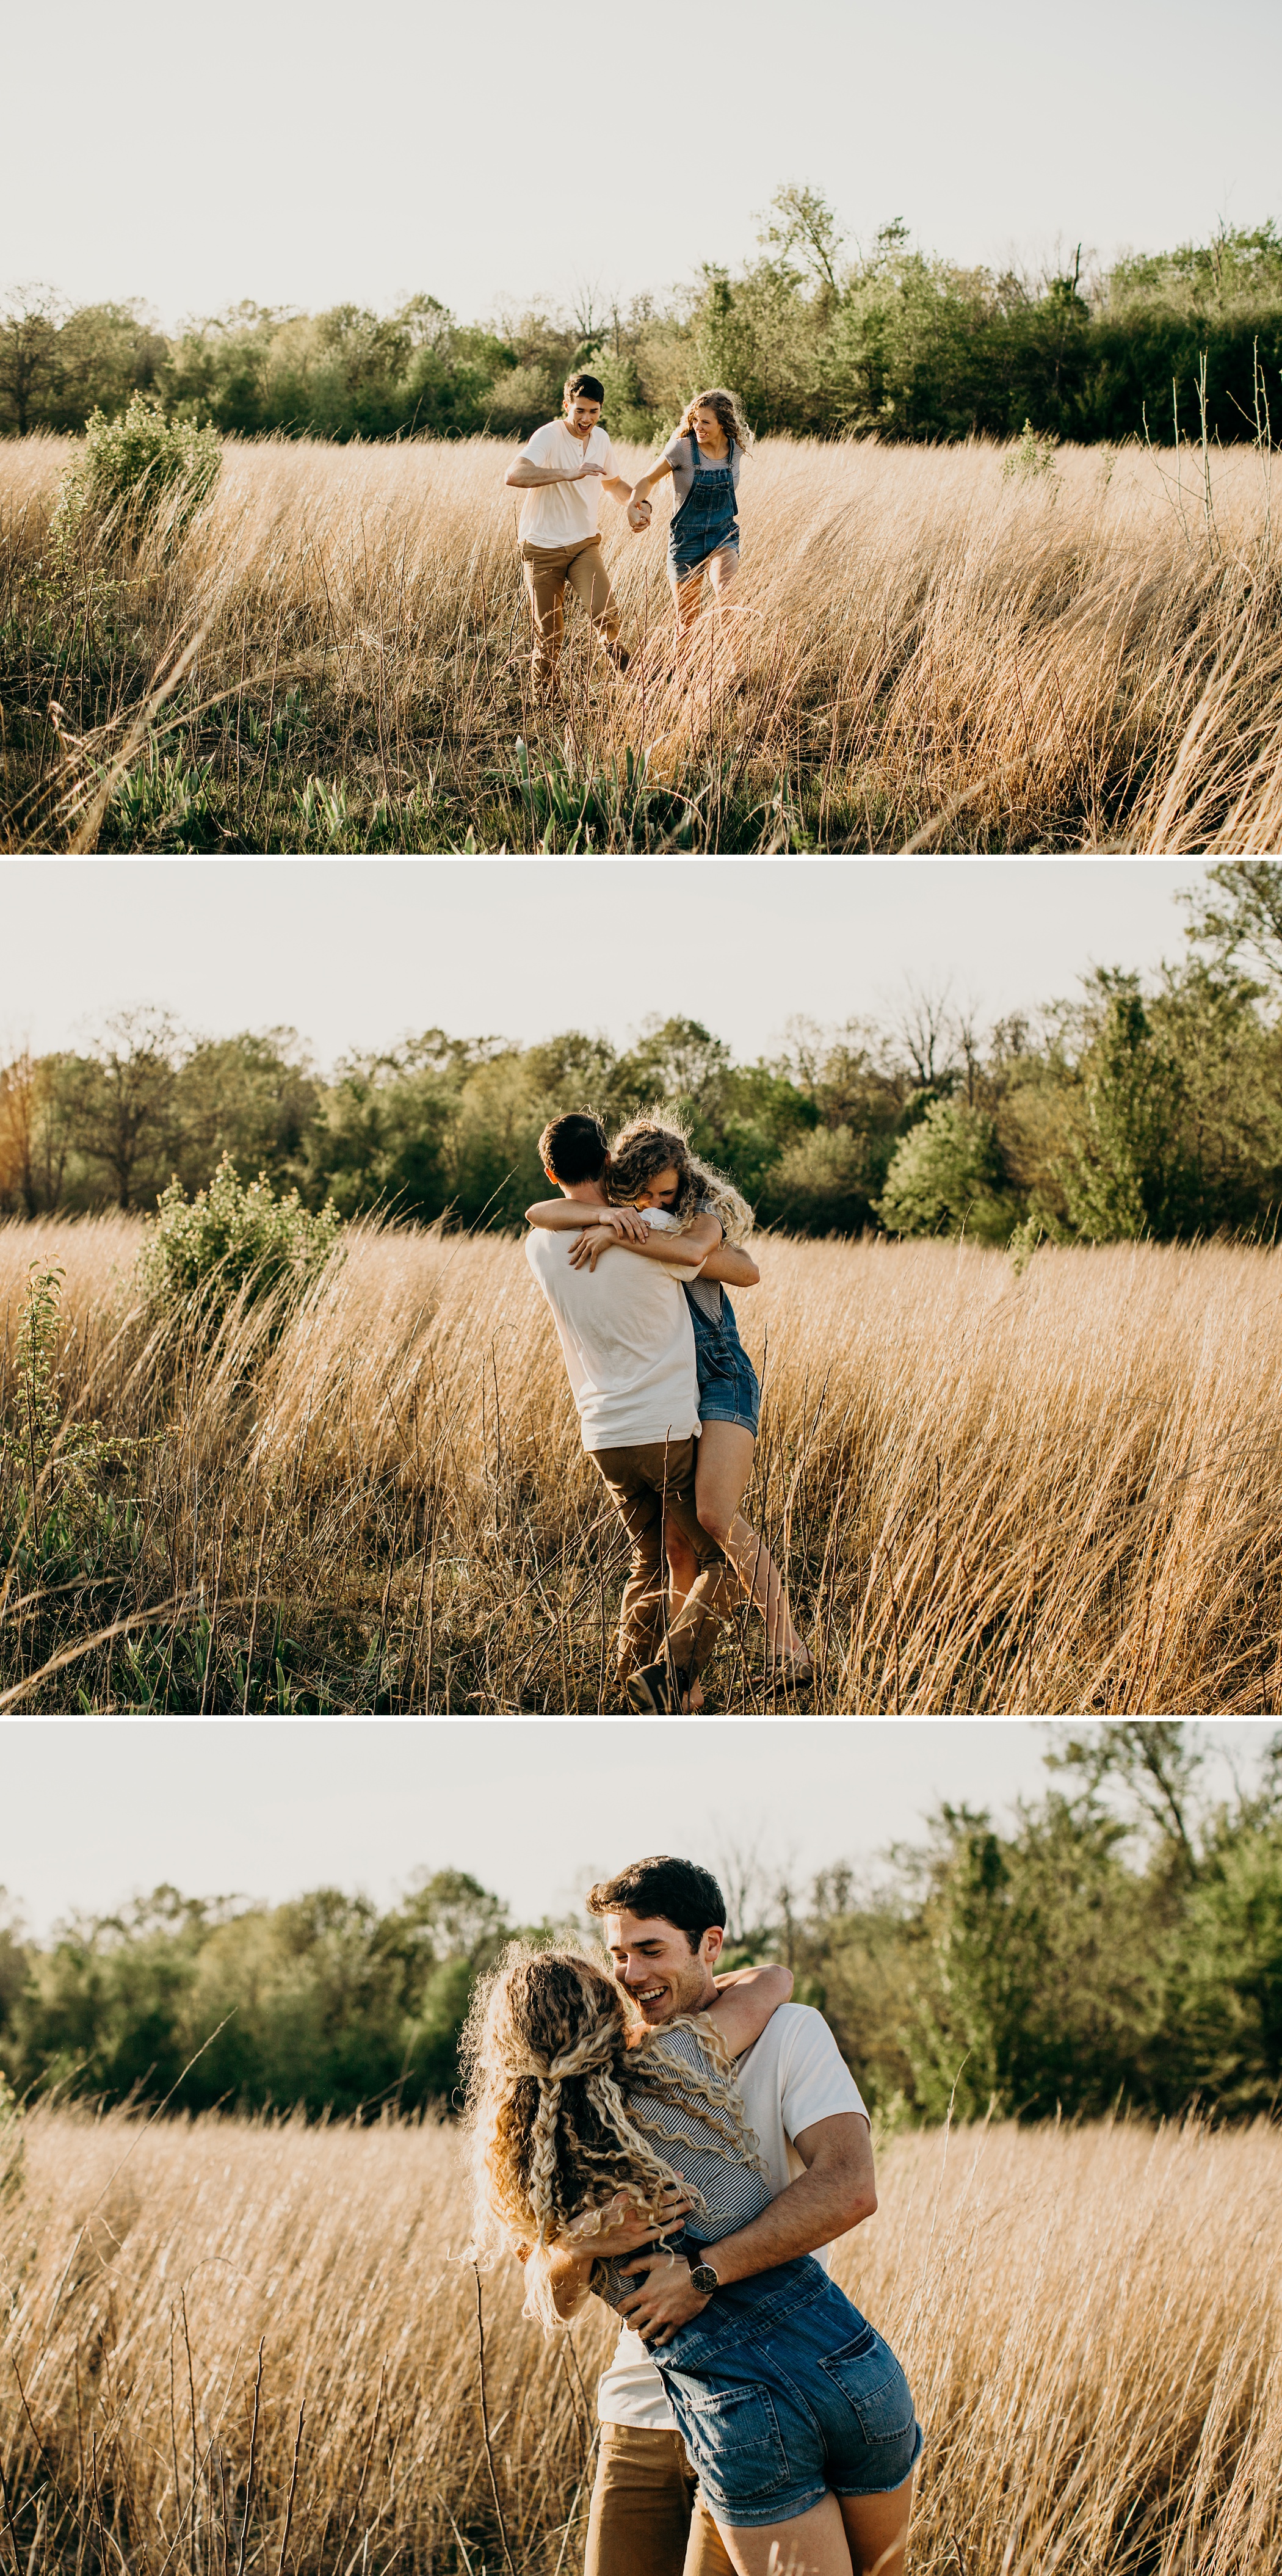 camping engagement session, colorado engagement session, the johnsons photo, intimate engagement session, adventurous engagement session, arkansas wedding photographer